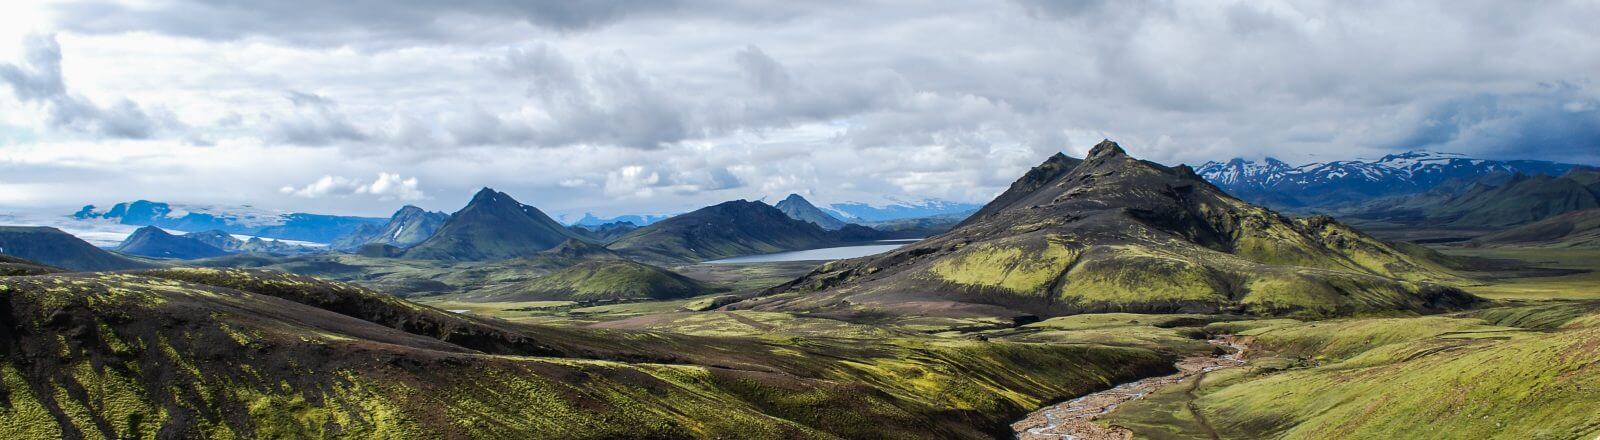 Laugavegur Hiking Trail in Iceland